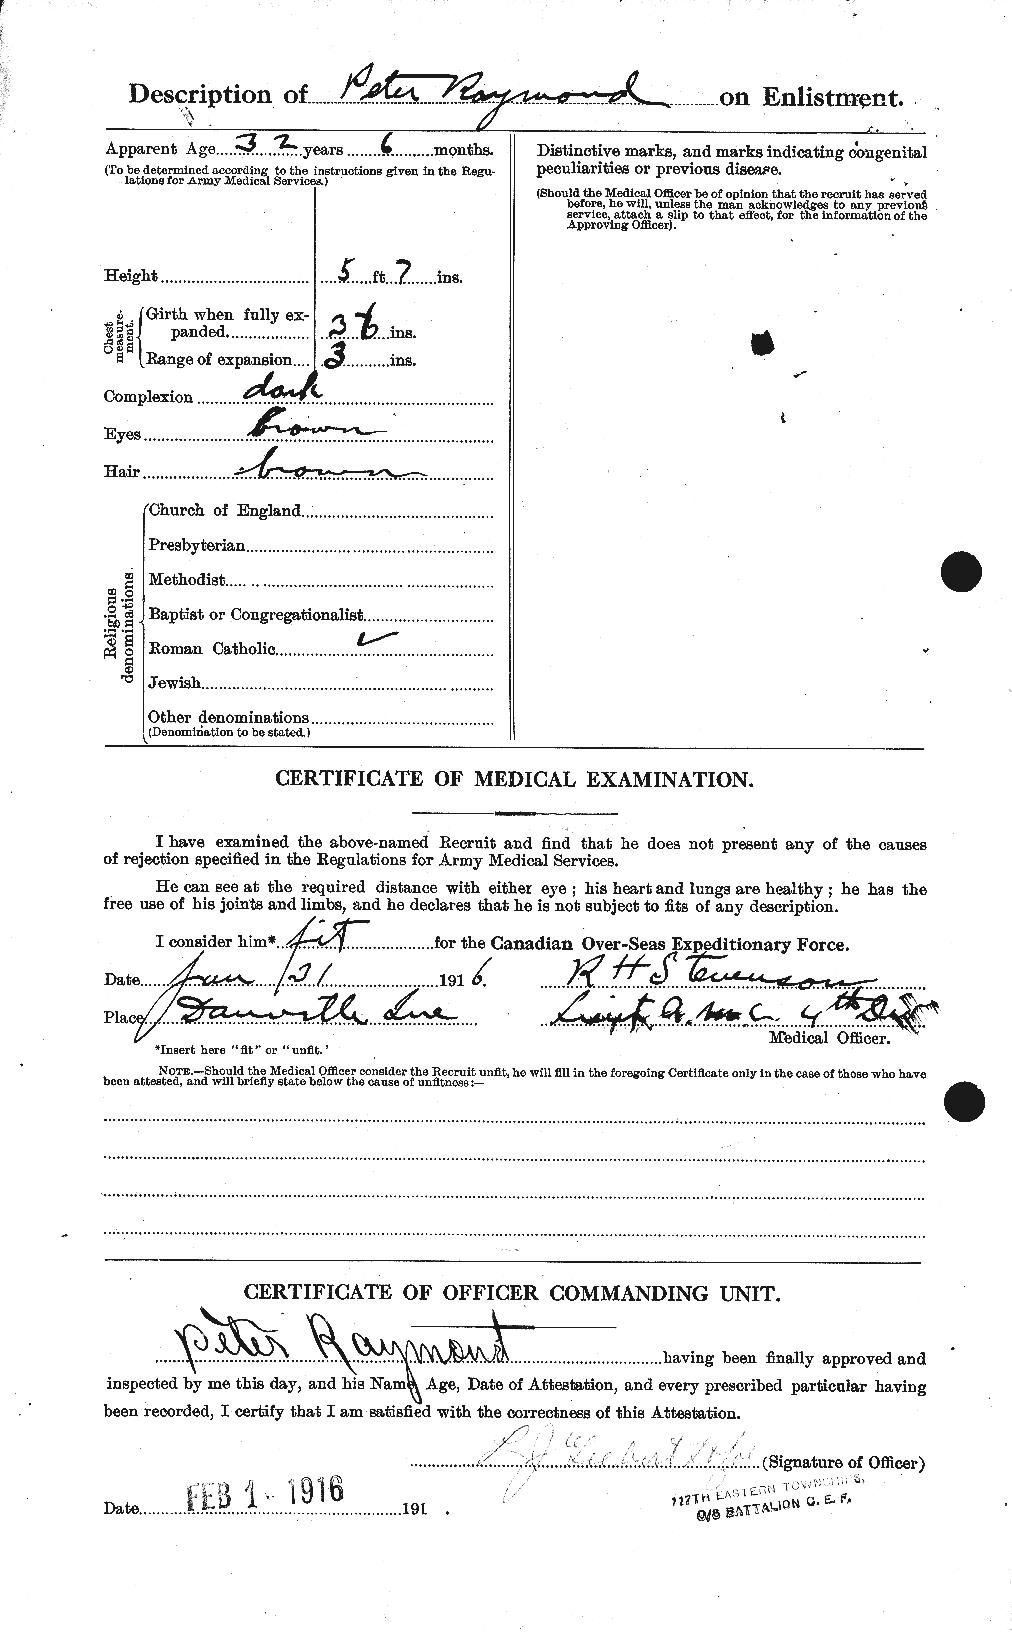 Personnel Records of the First World War - CEF 595441b